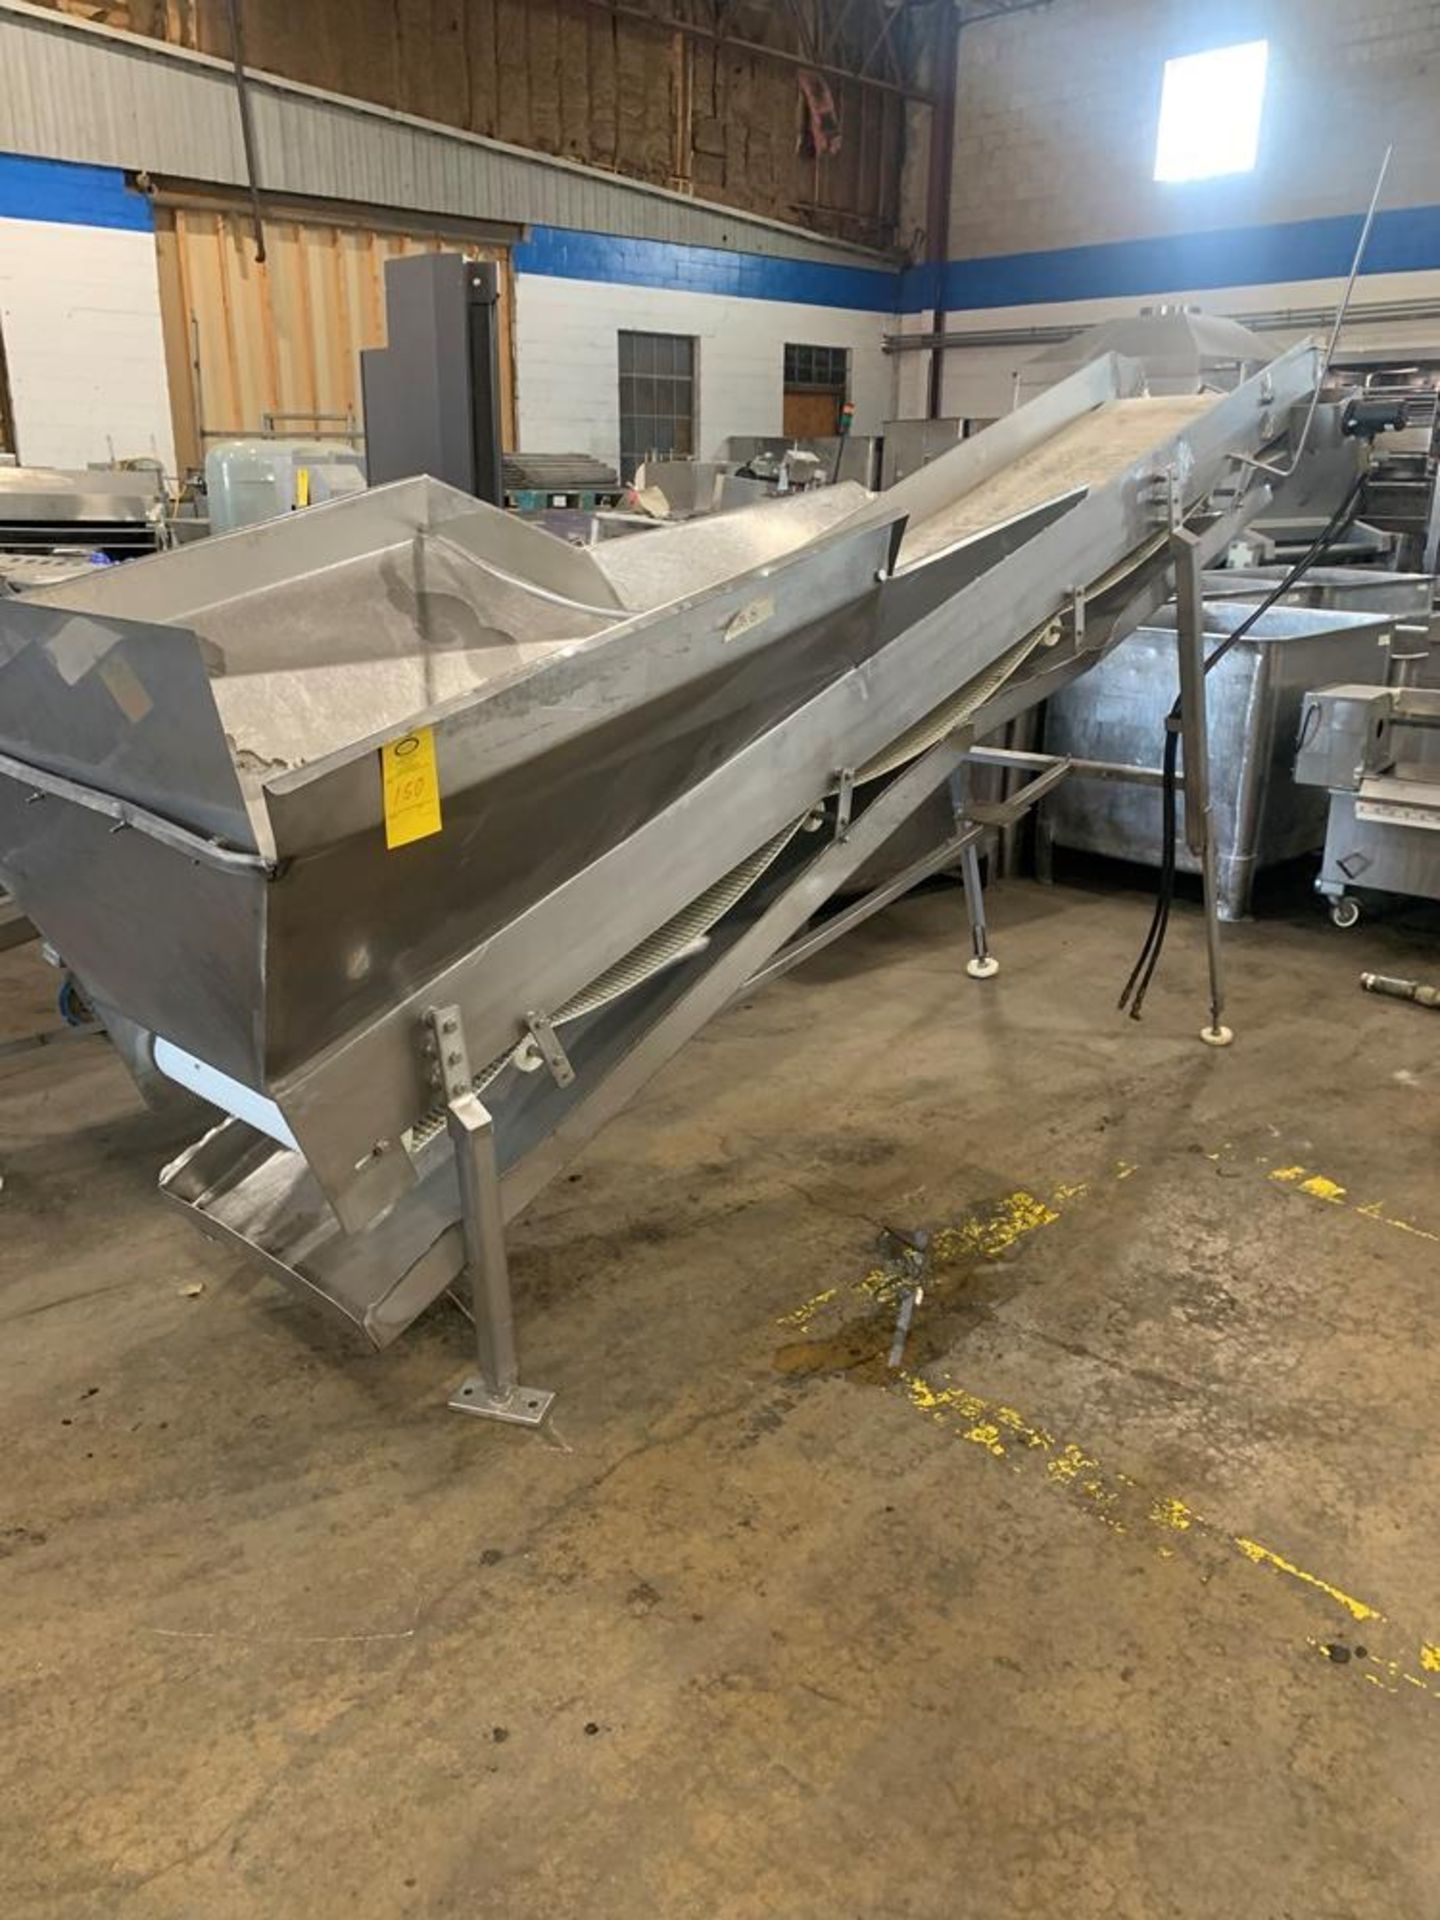 Incline Intralox Conveyor, 24" wide X 13' long belt with hopper, 70" discharge height (Located in